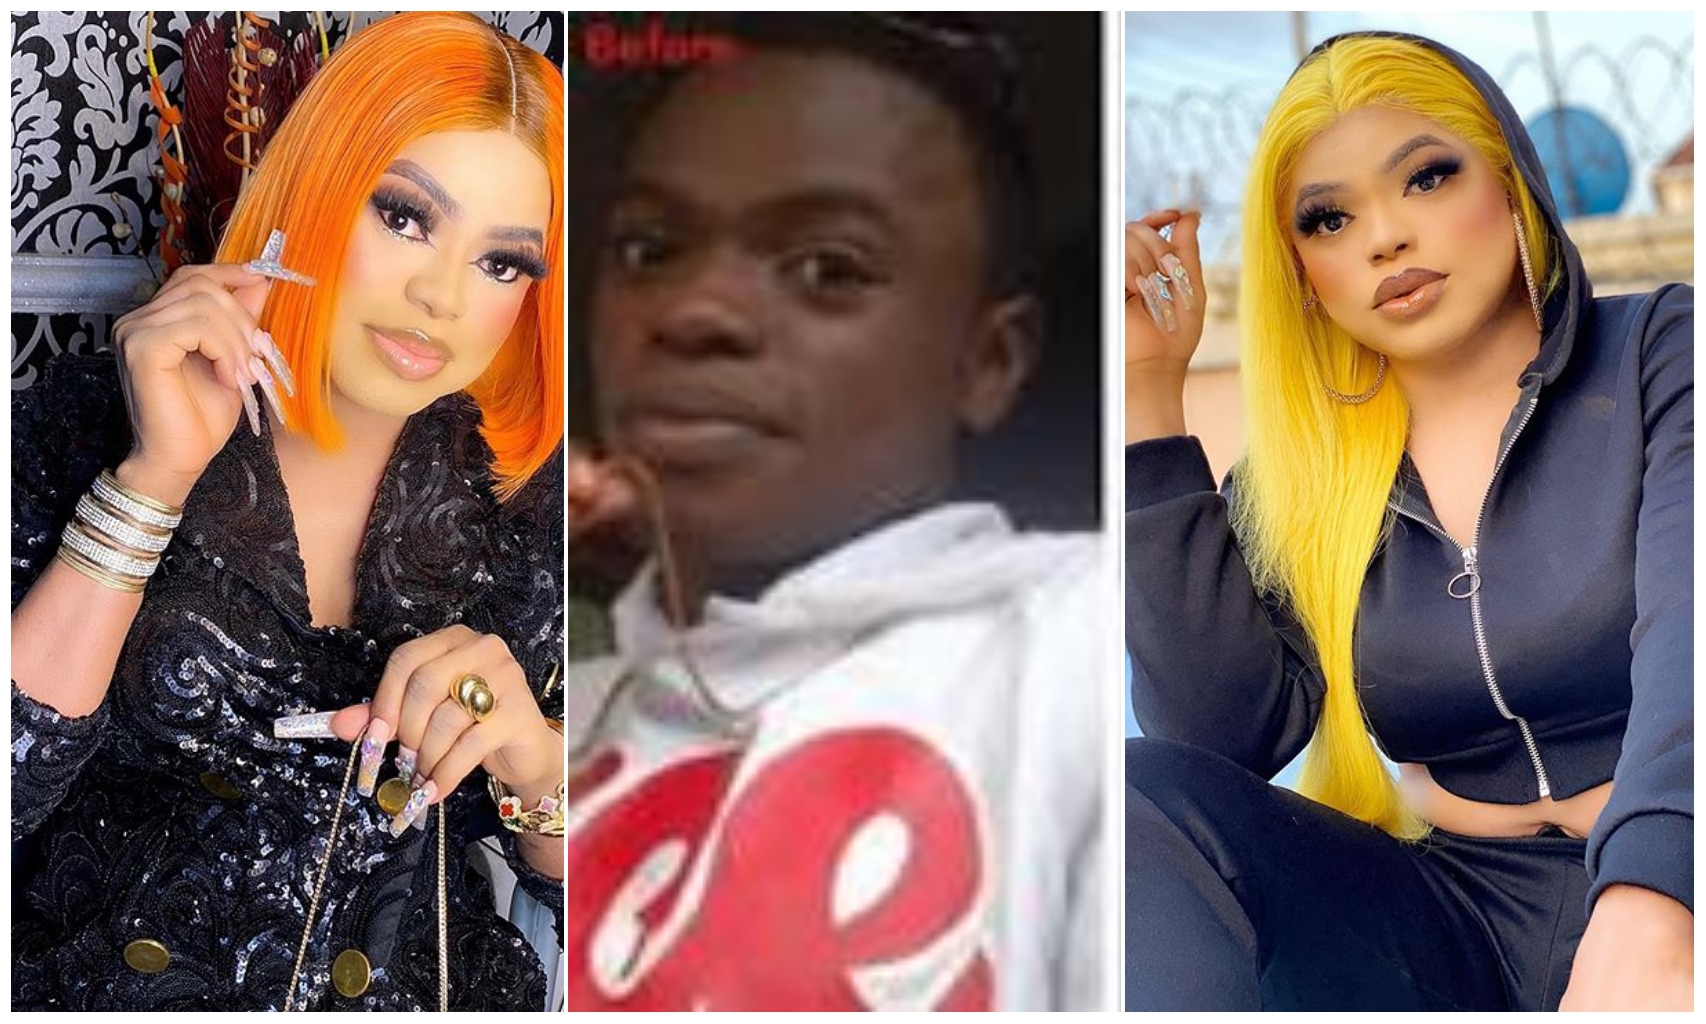 5yrs ago life throw hardship at me – Bobrisky reminisces on his past